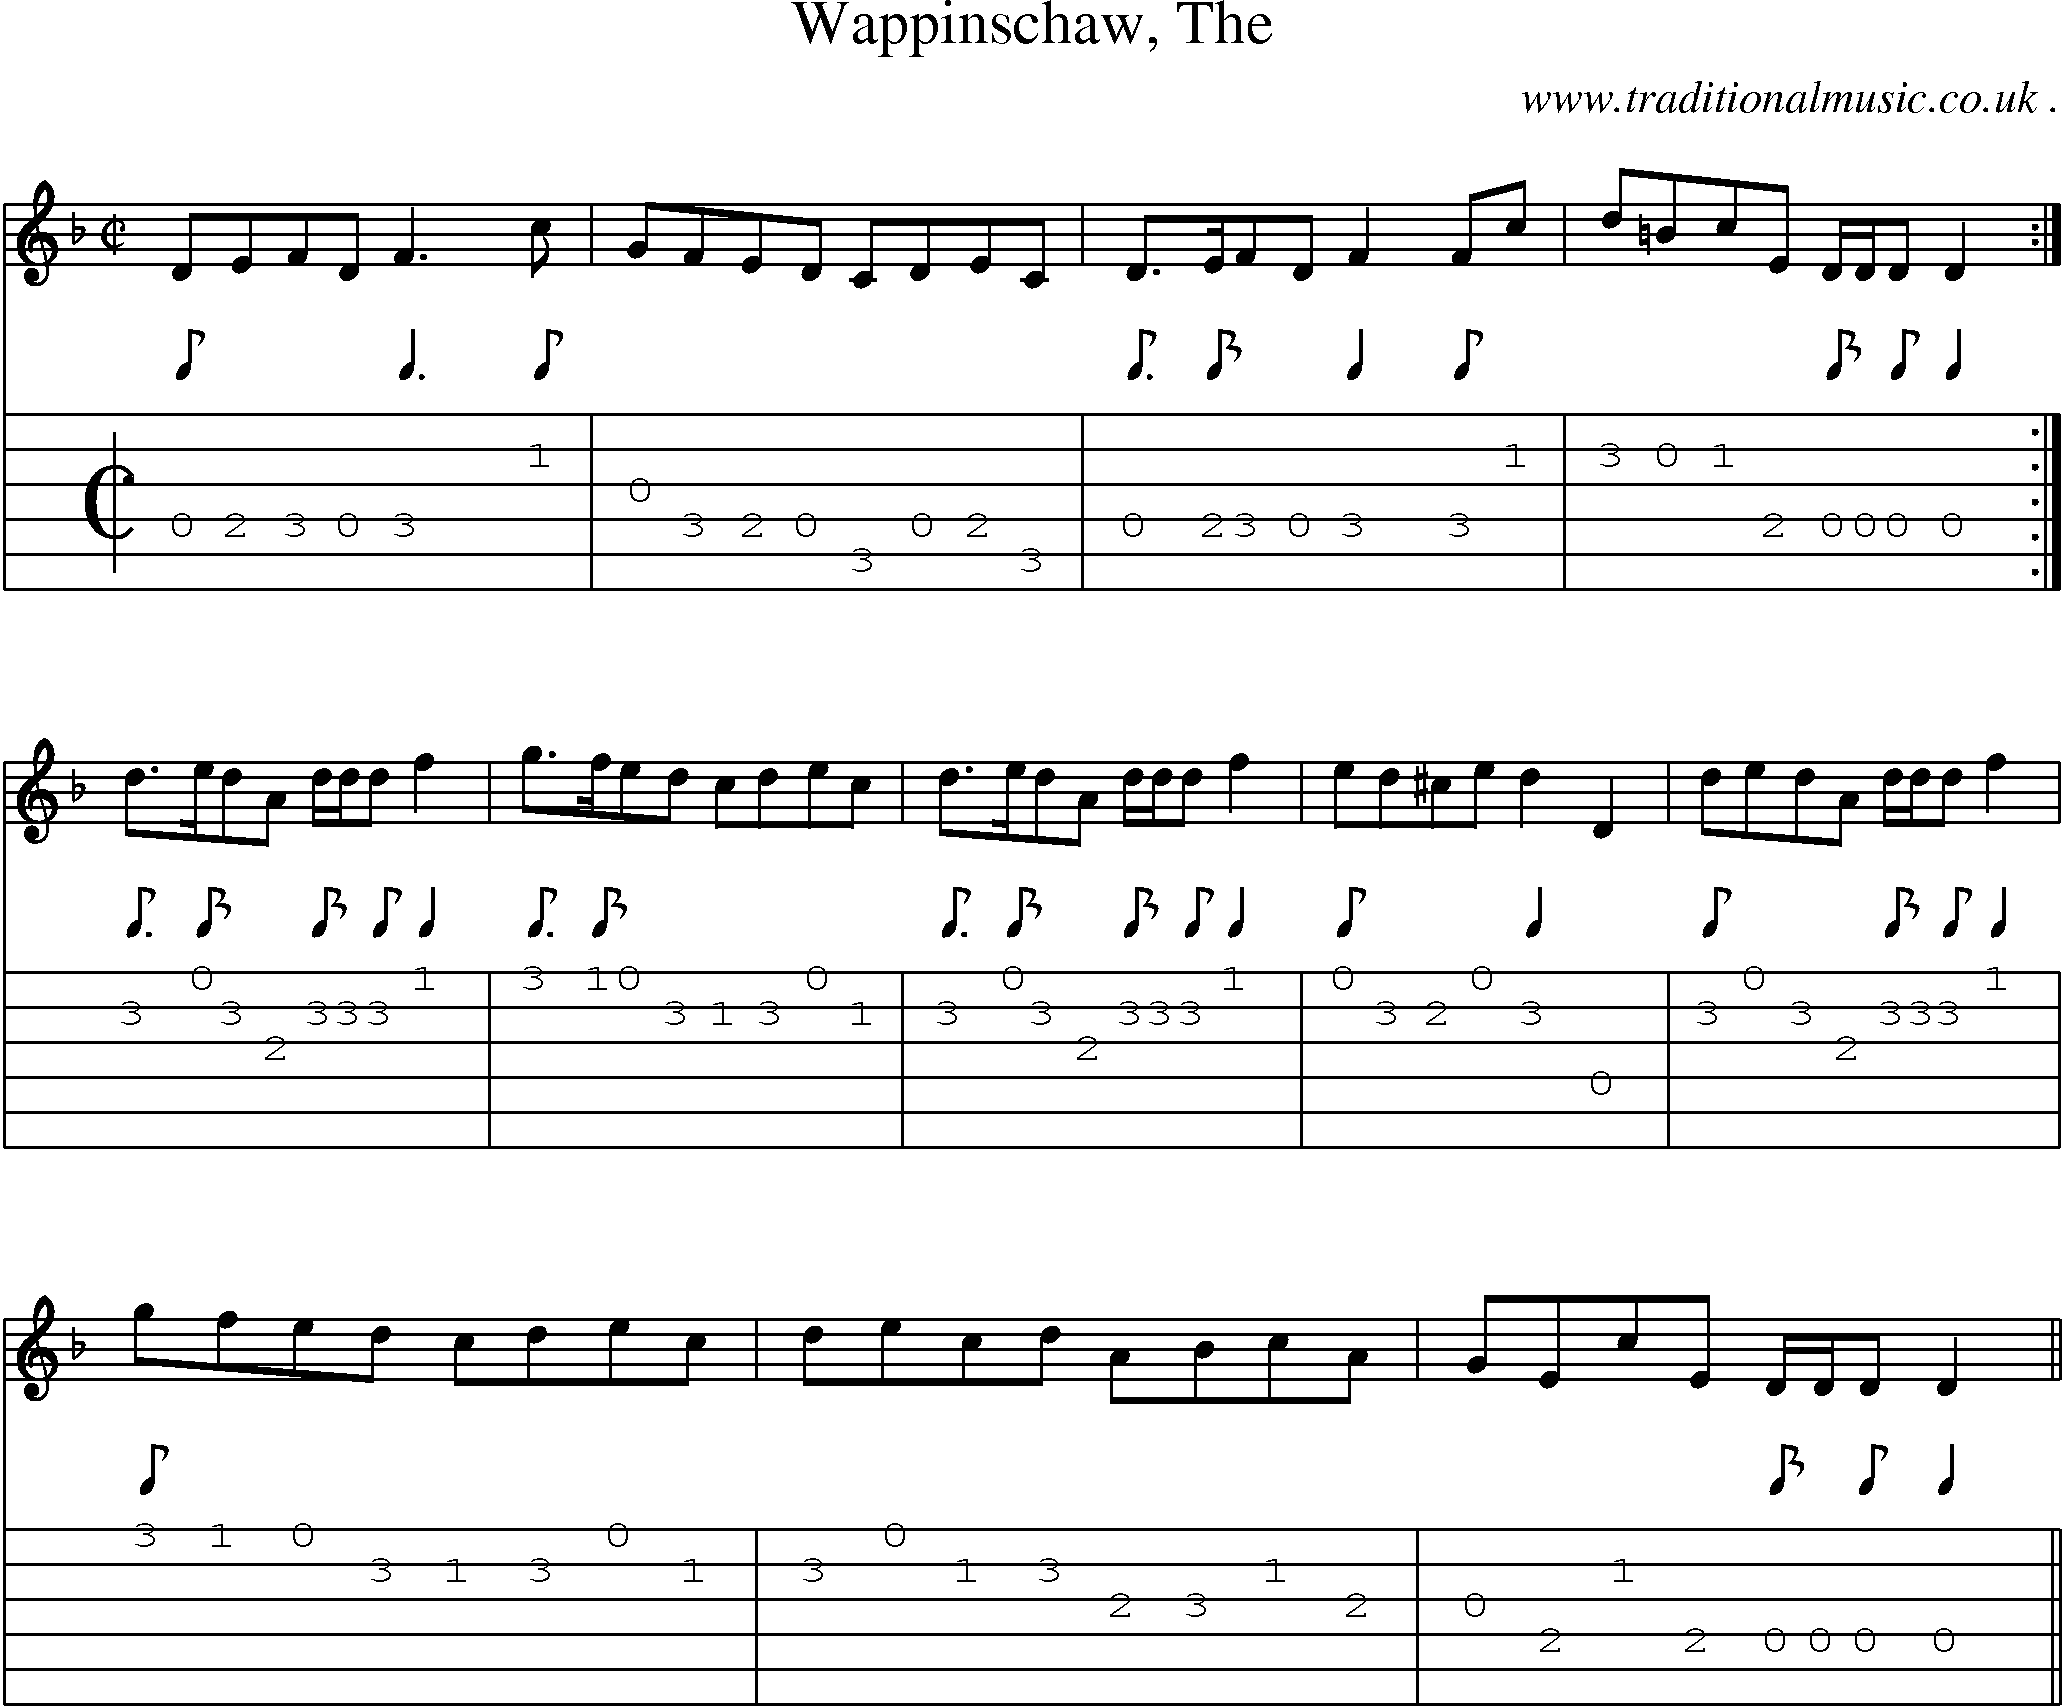 Sheet-music  score, Chords and Guitar Tabs for Wappinschaw The